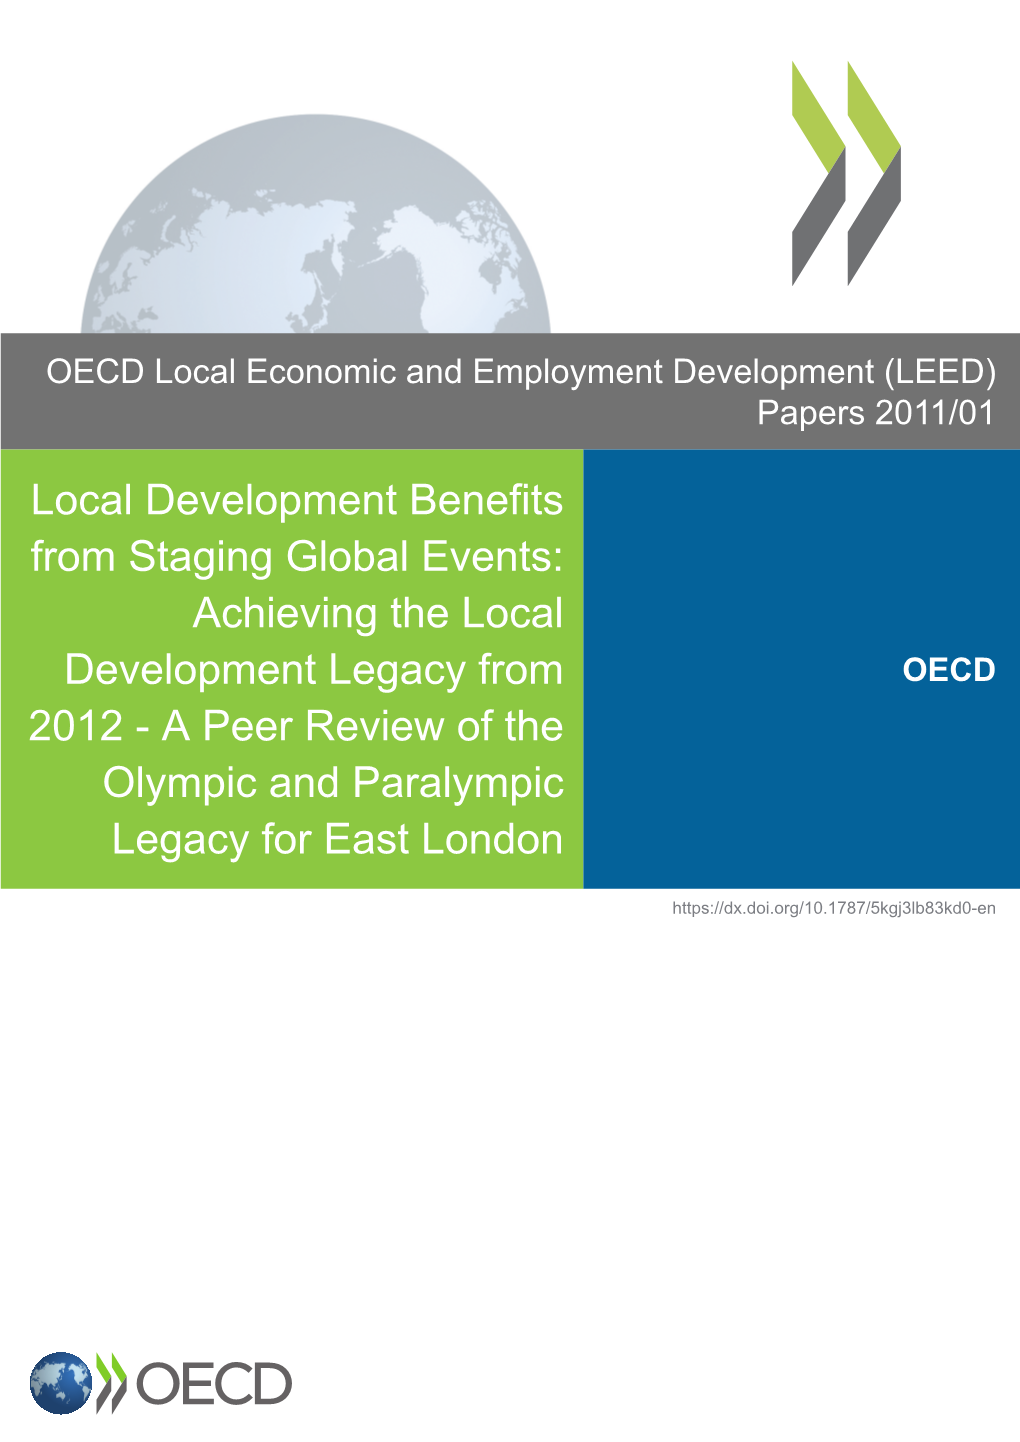 Local Development Benefits from Staging Global